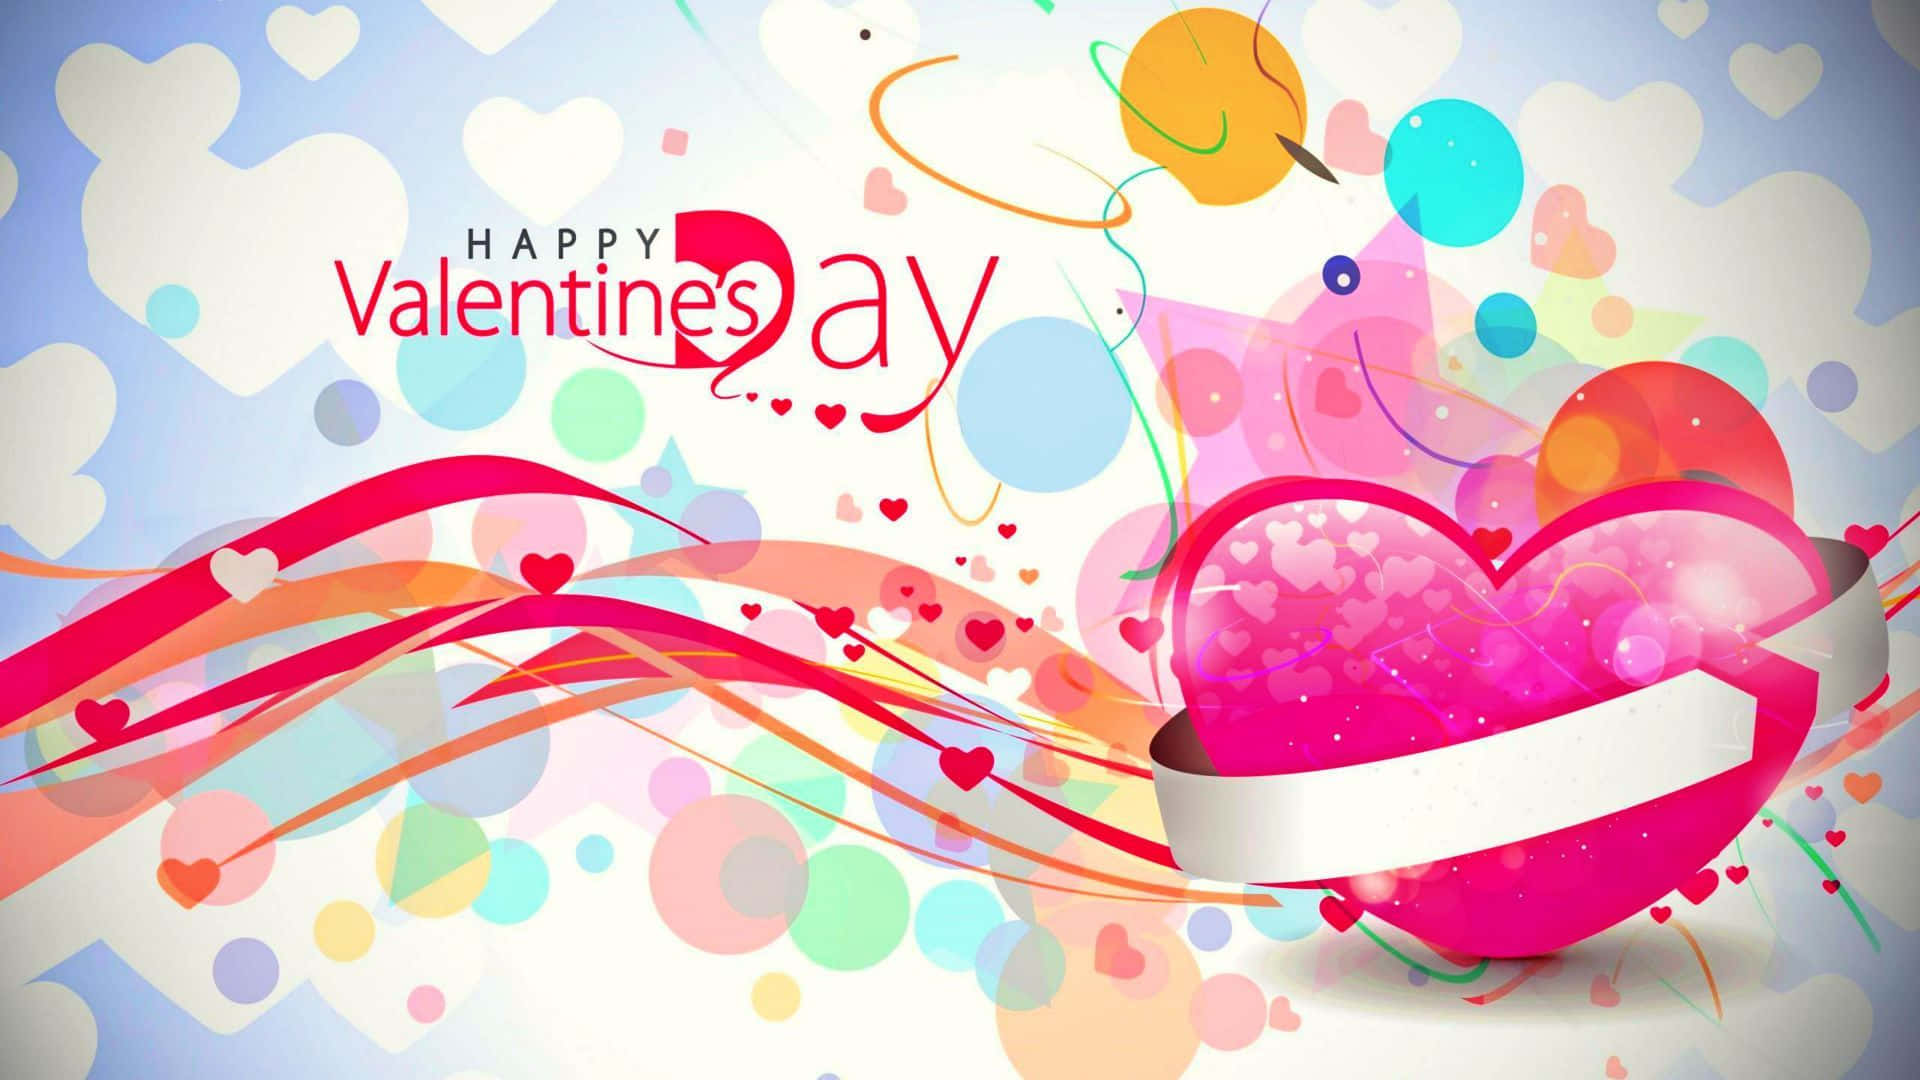 Valentine's Day Wallpapers With Hearts And Hearts